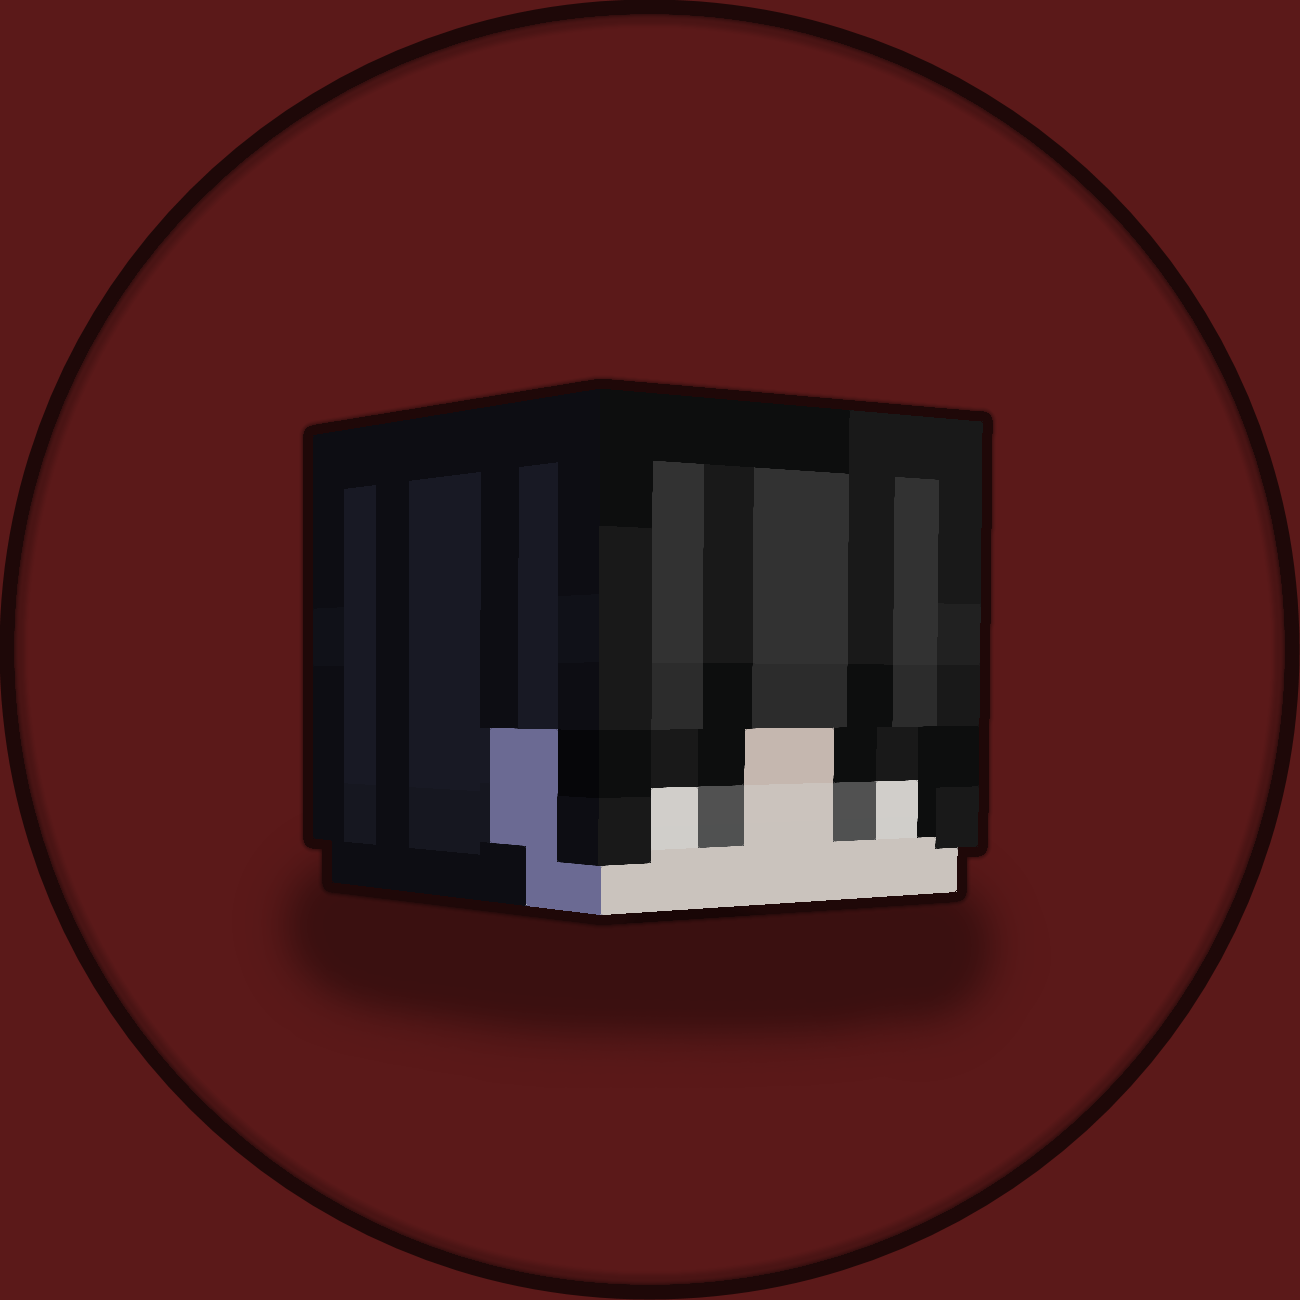 Profile picture of Waitress on PvPRP